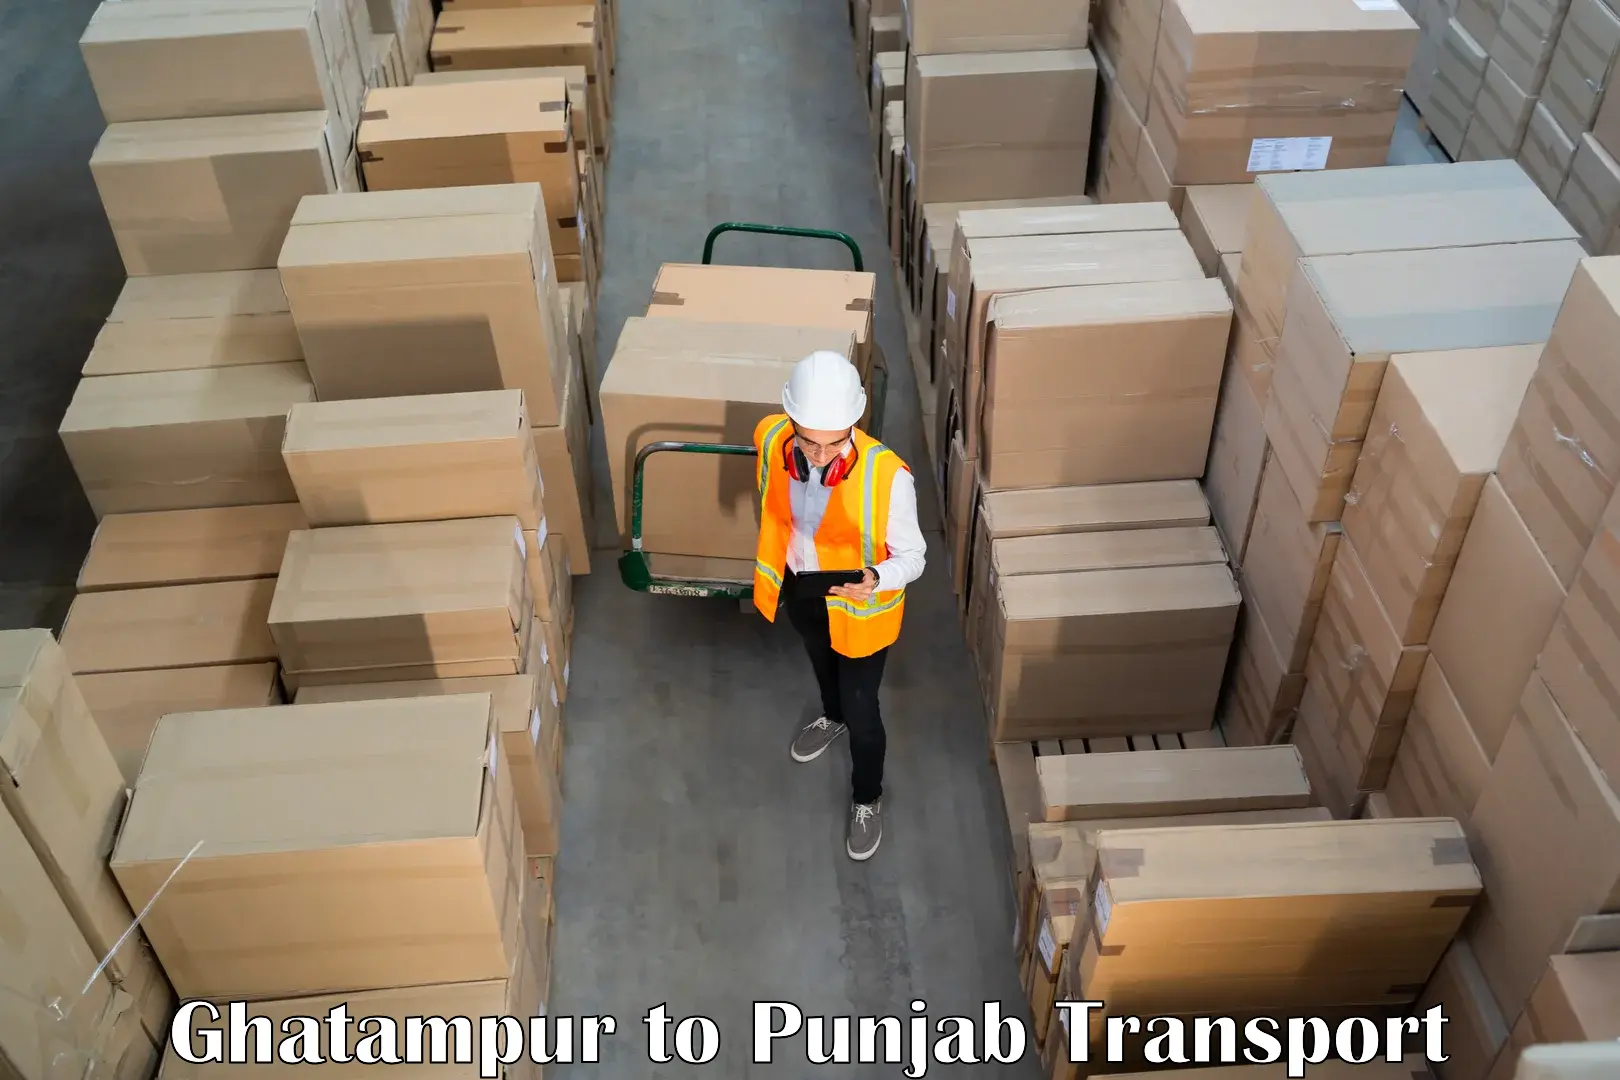 Truck transport companies in India Ghatampur to Dharamkot